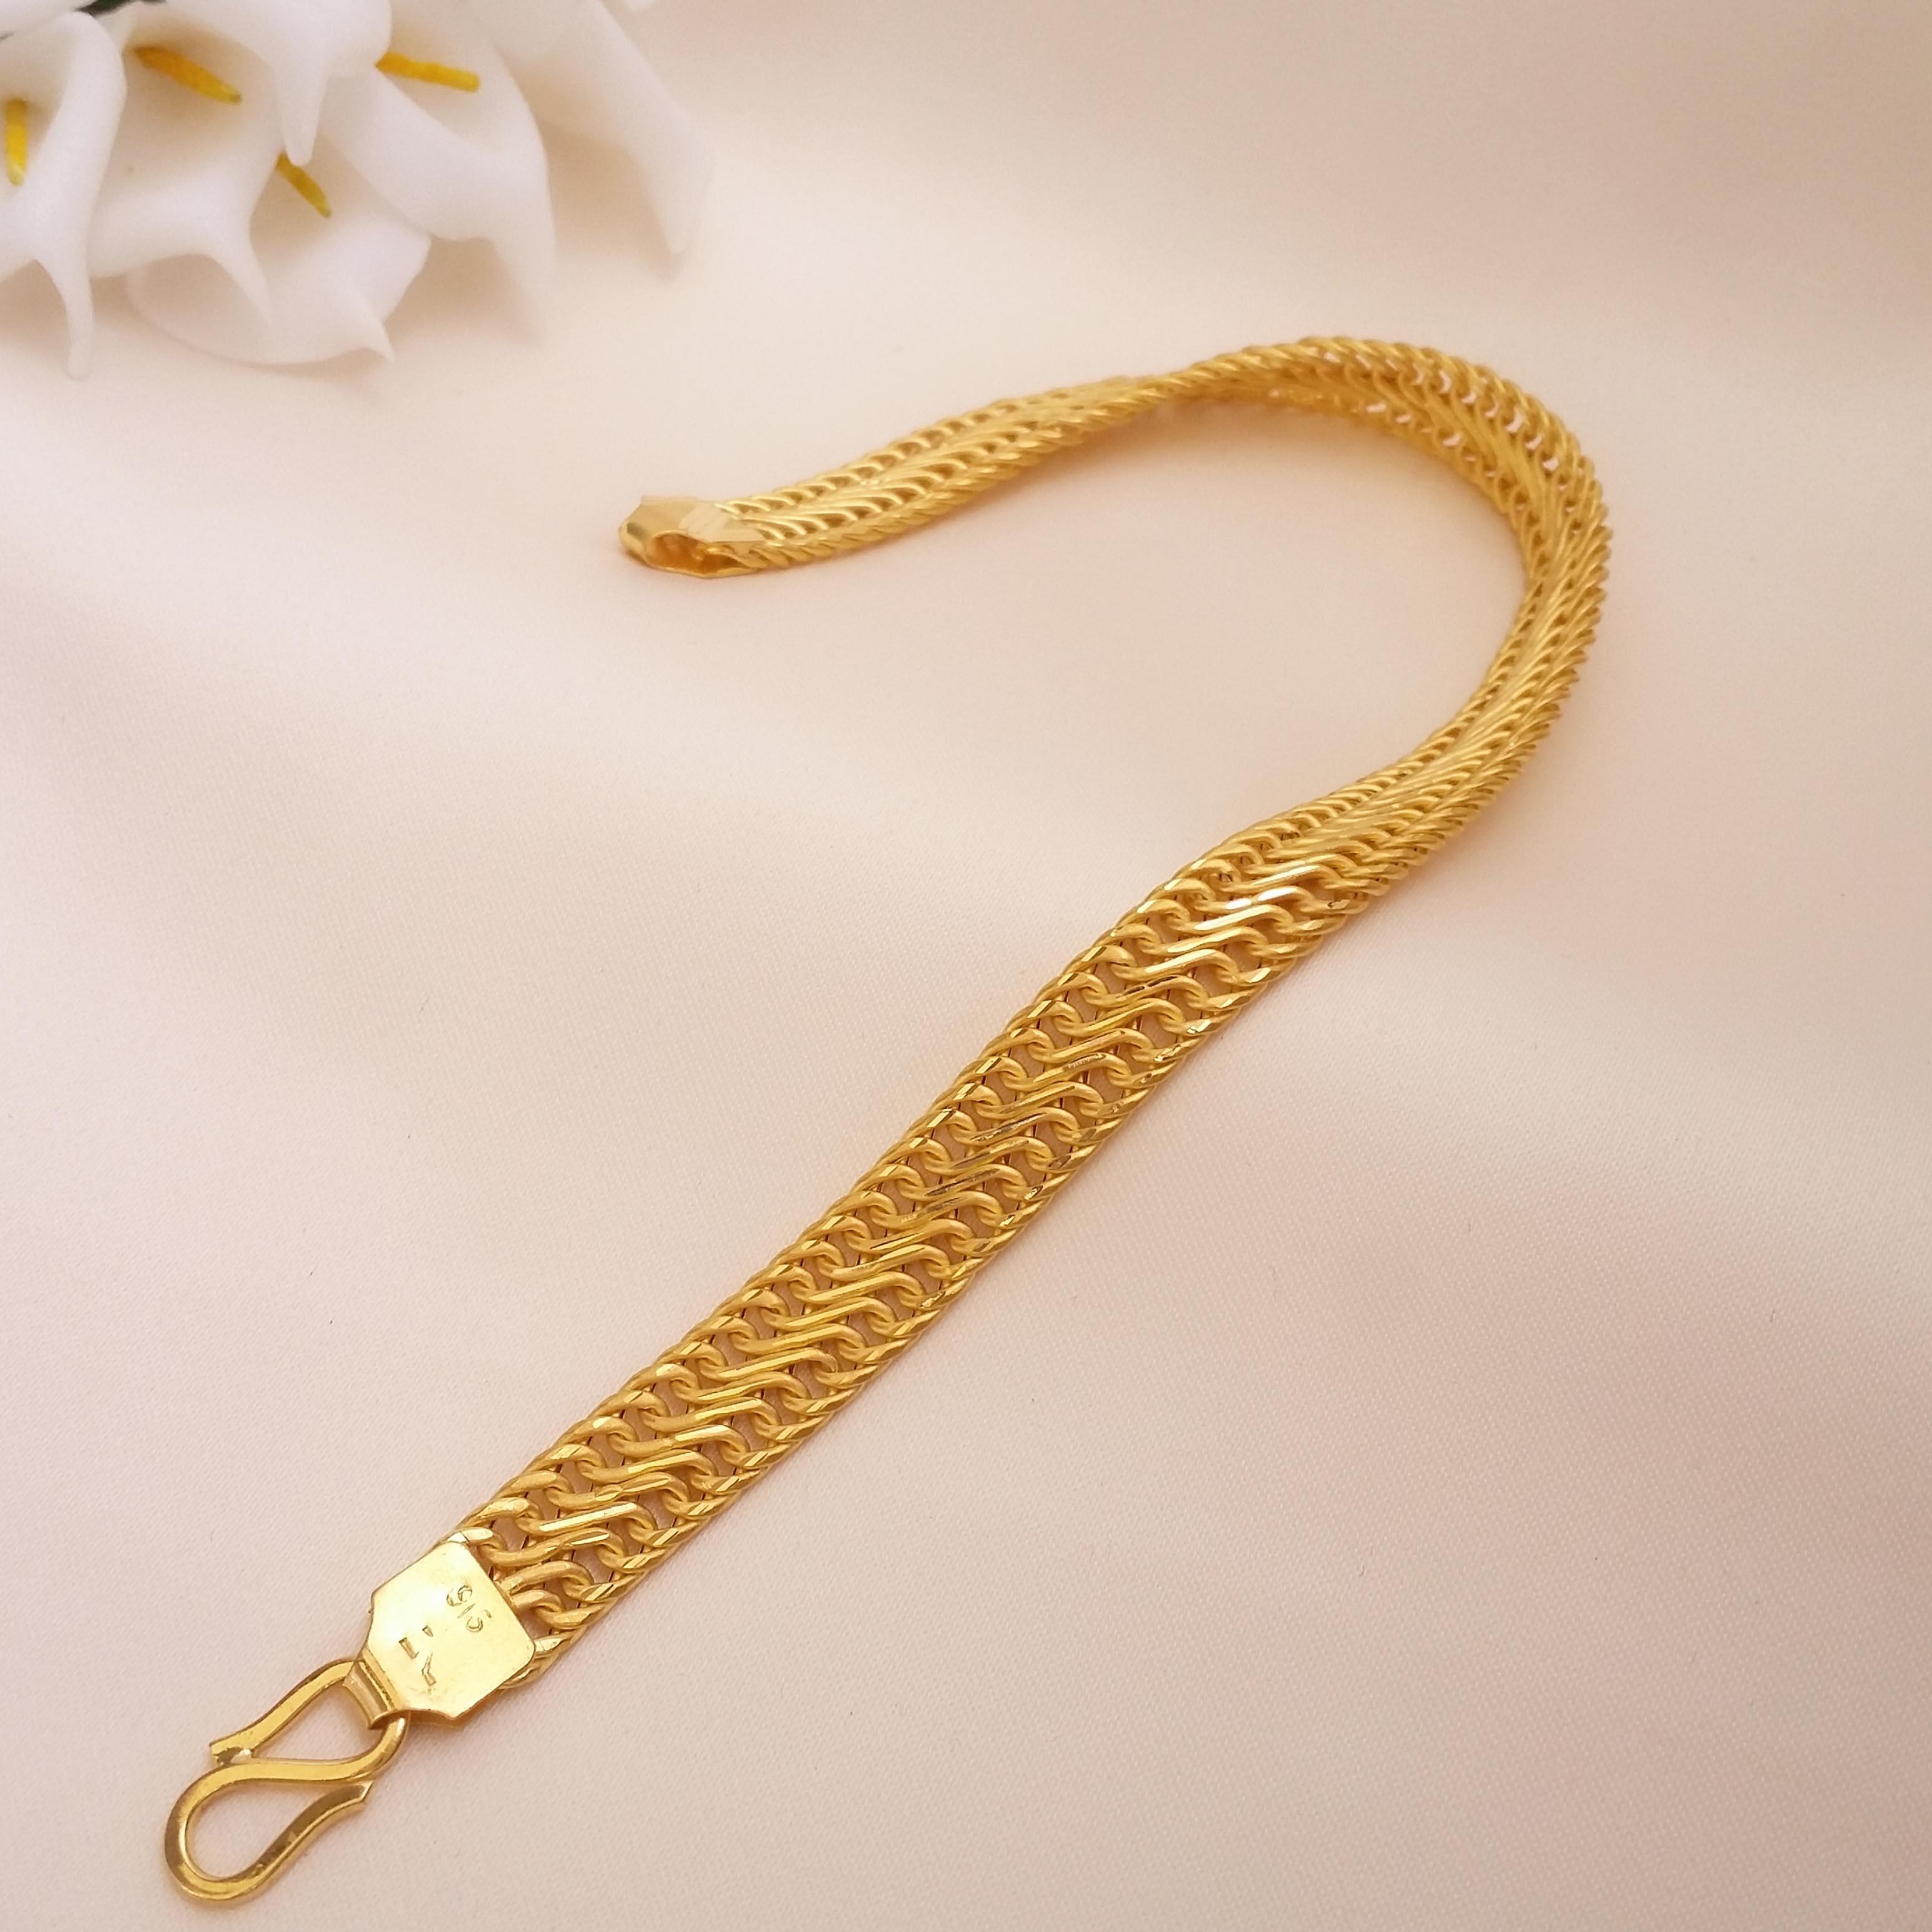 Gold Plated Silver Bracelet | Gold Plated Silver Jewelry Designs In Pakistan-baongoctrading.com.vn